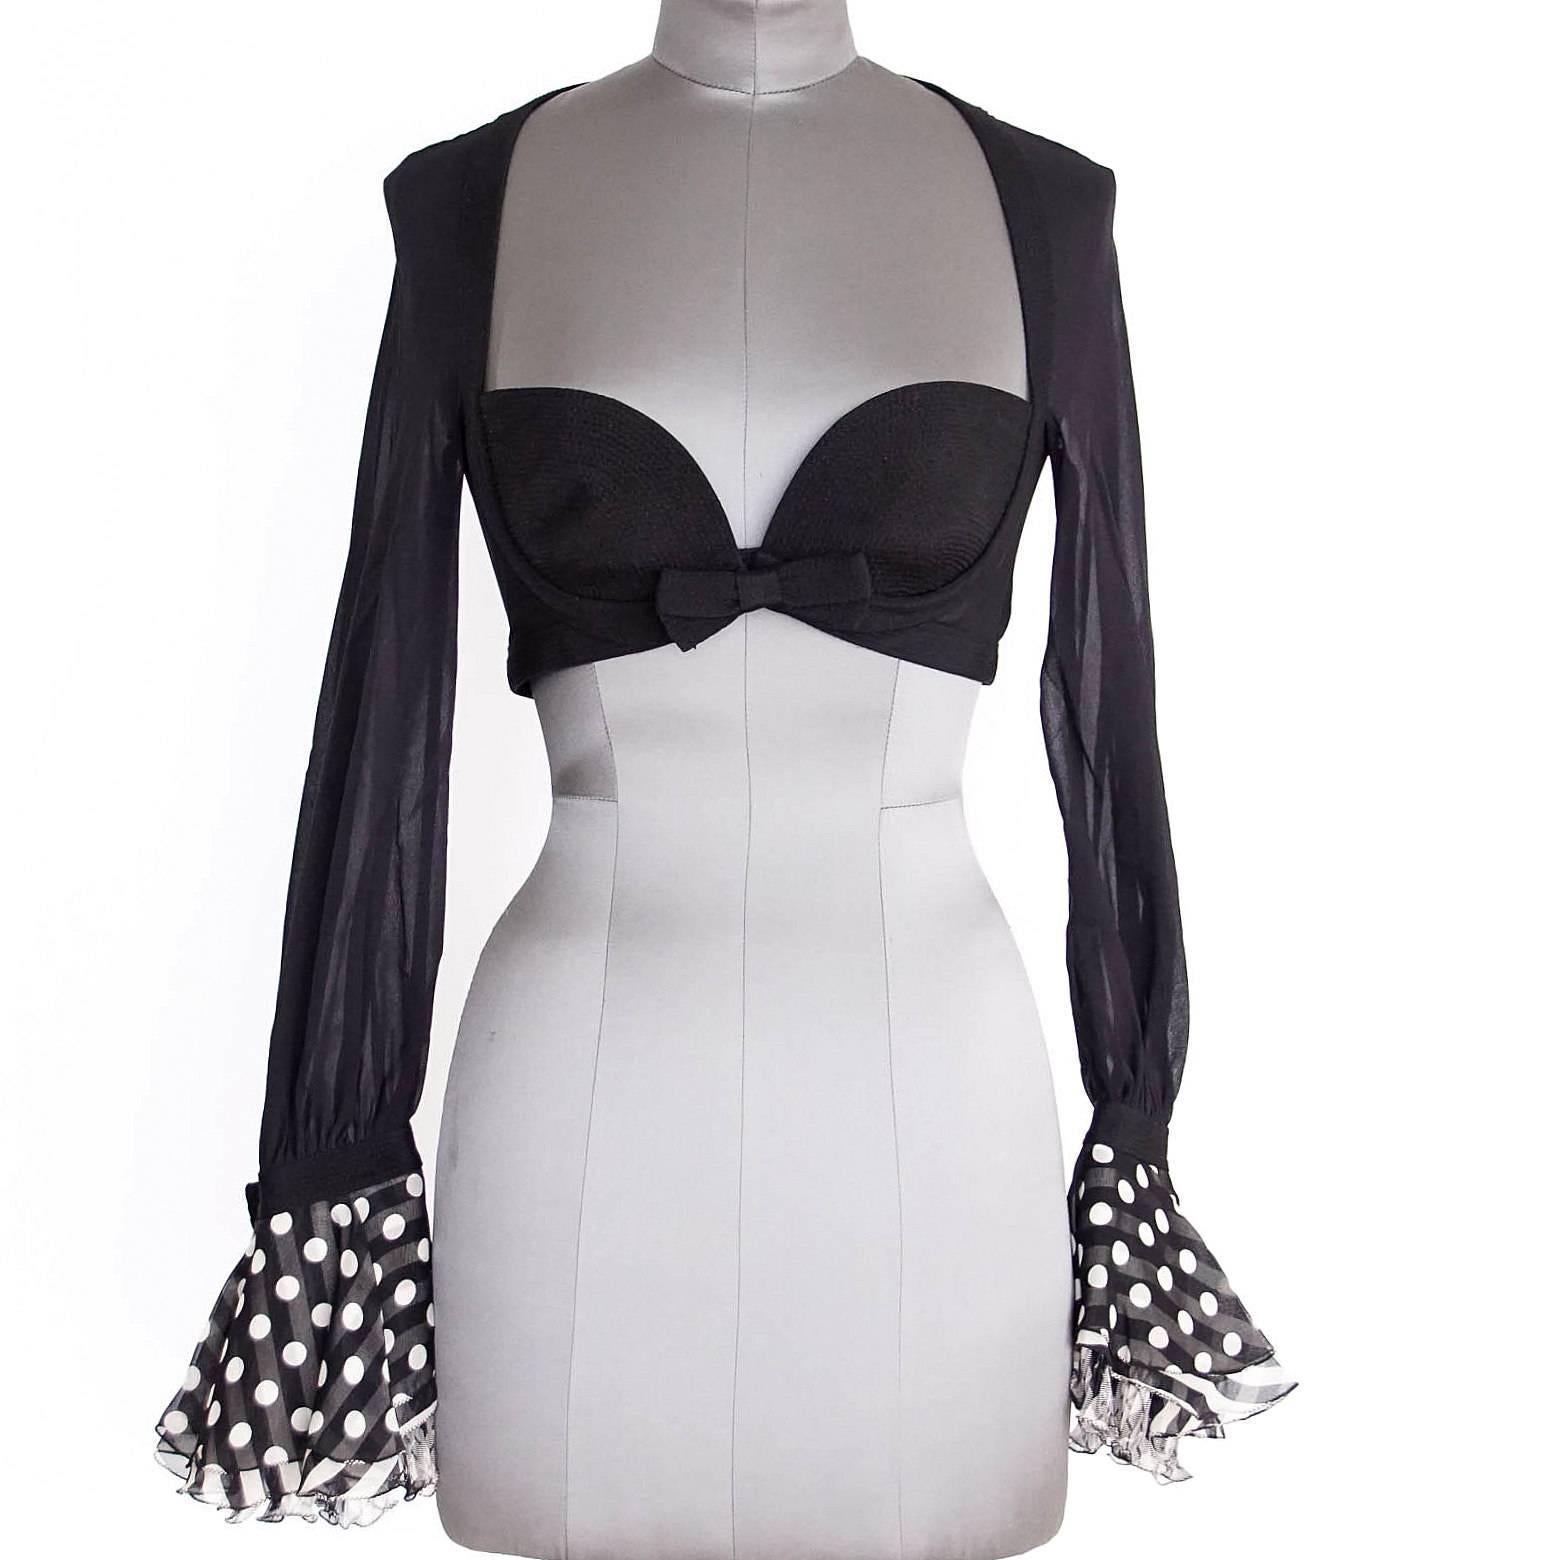 Guaranteed authentic GIANNI VERSACE COUTURE Vintage black semi sheer silk bra top
with built in bra cups.
Front hook and eye closure under decorative bow.
Beautiful sheer long sleeves with ruffled cuffs in tiered polka dot, stripe, and argyle